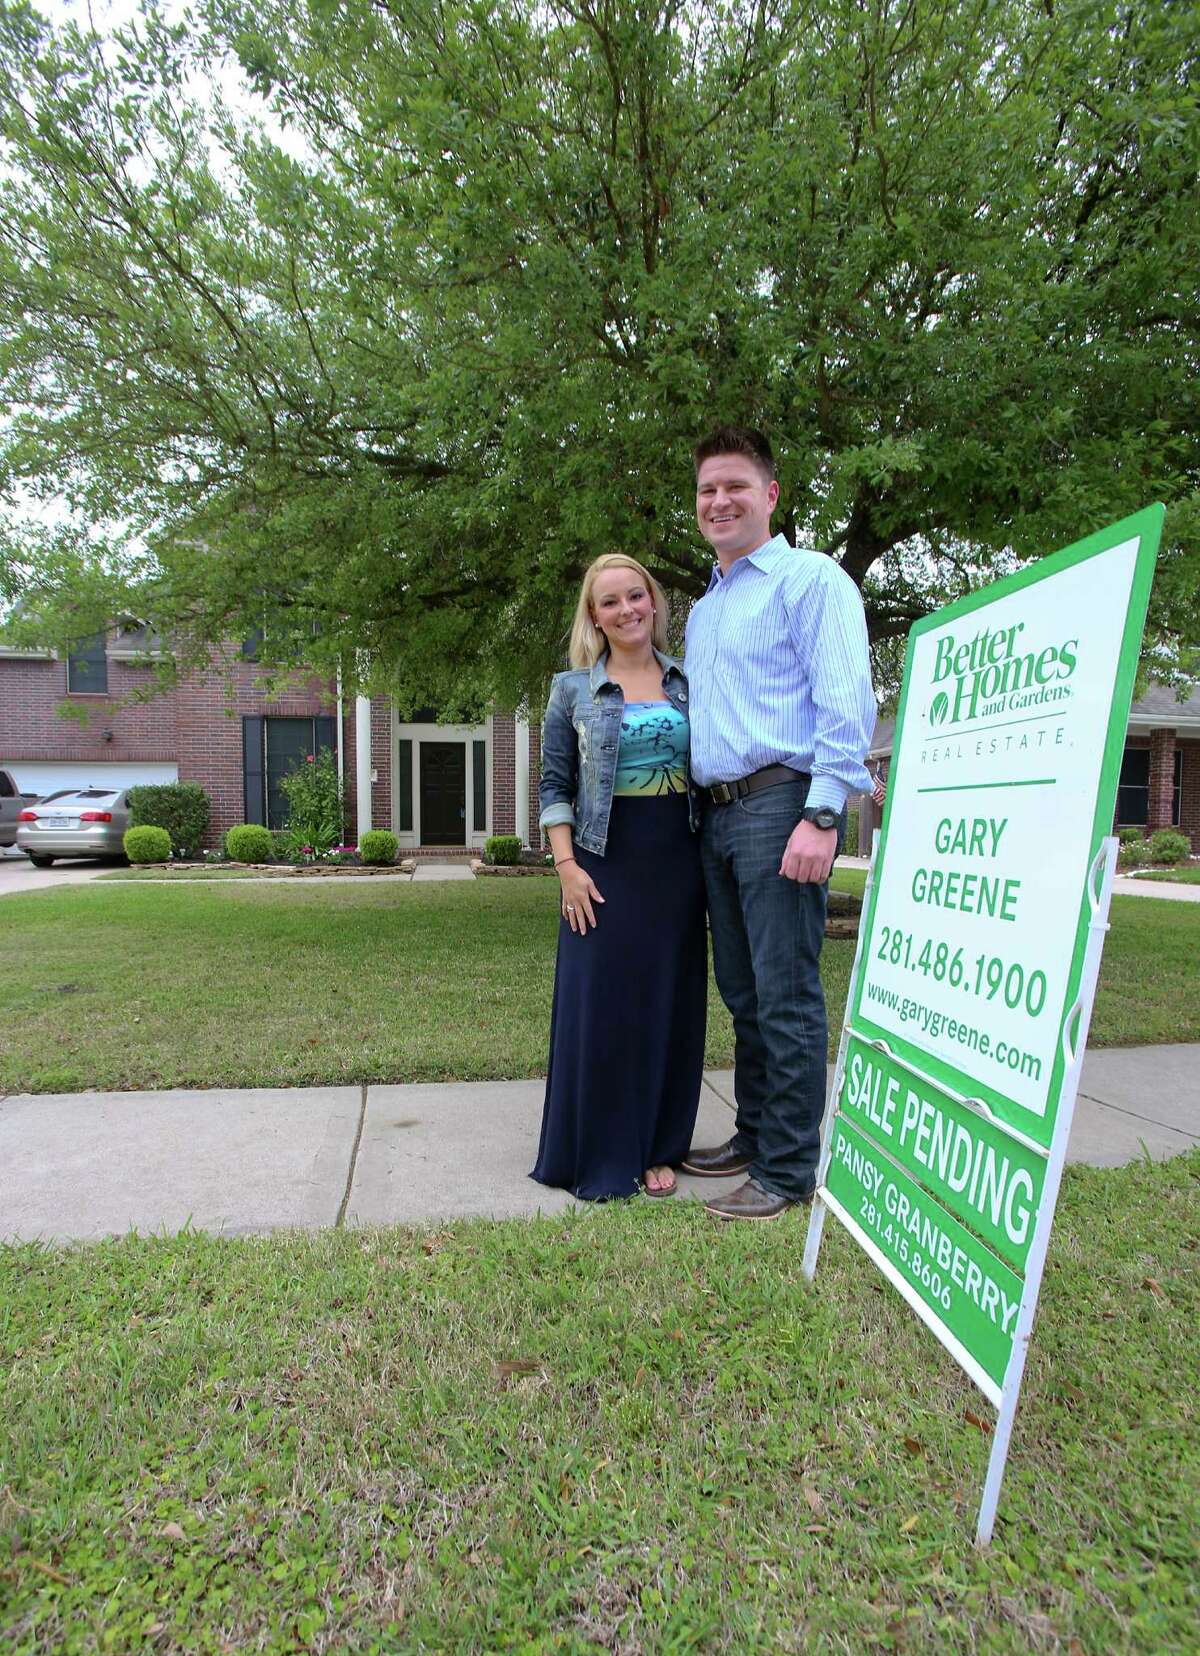 4/9/13: Nathan Cloutier age 33 and girlfriend Christina Aten age 28 in front of their newly purchased home in Pearland, Texas. Nathan is part of a young generation of buyers that are taking the leap into homeownership The two moved from an apartment in Clear Lake, Texas.